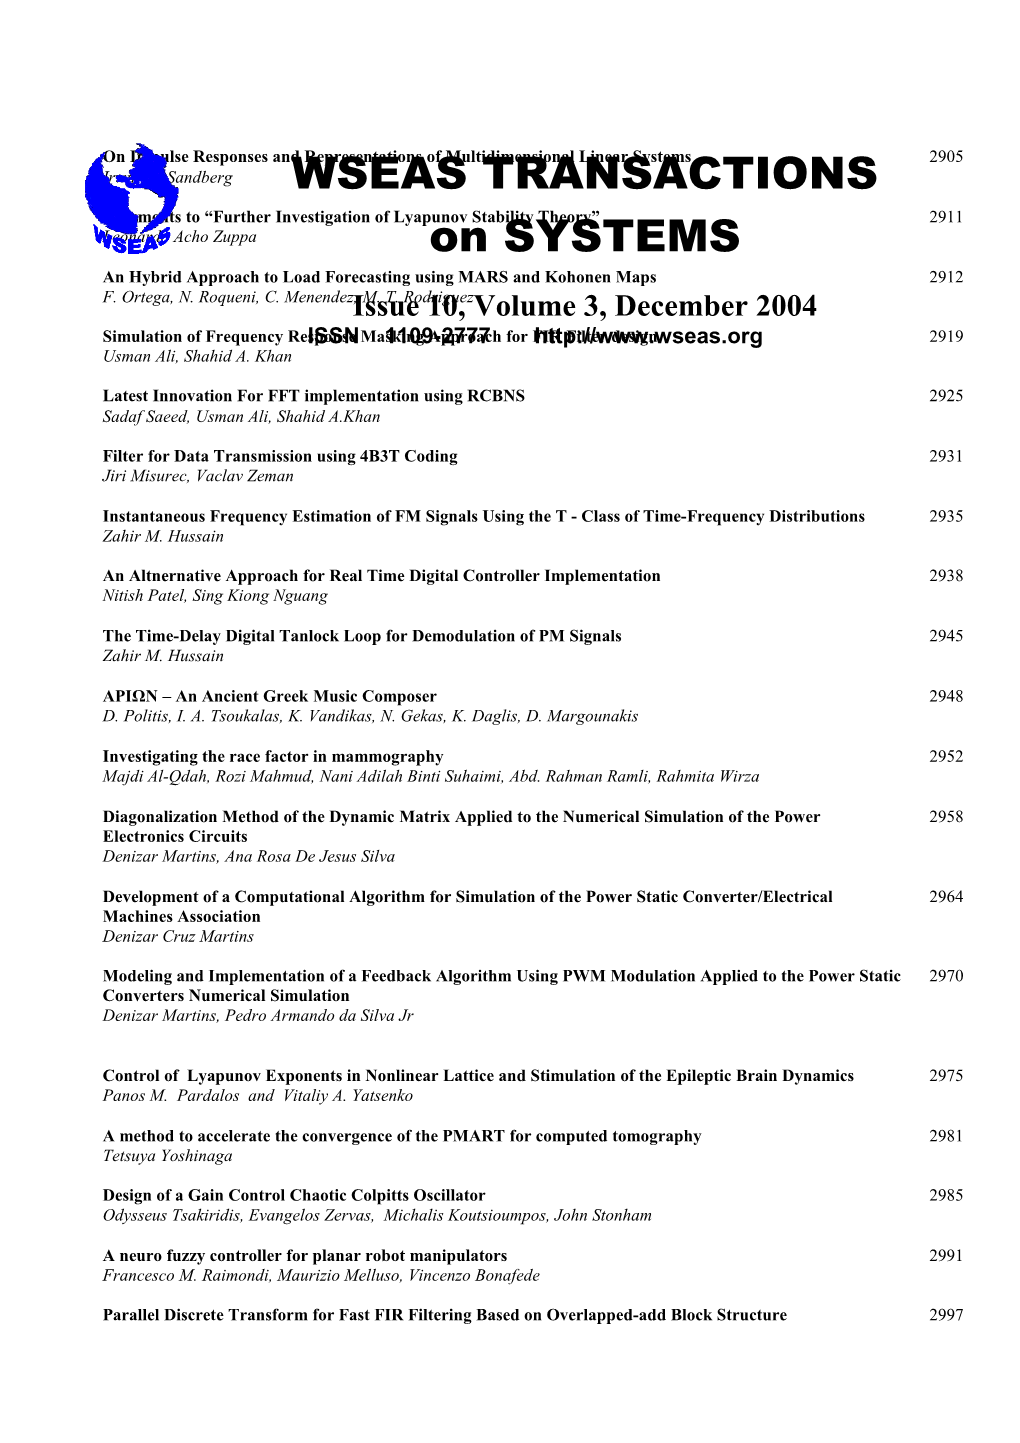 WSEAS Trans. on SYSTEMS, December 2004